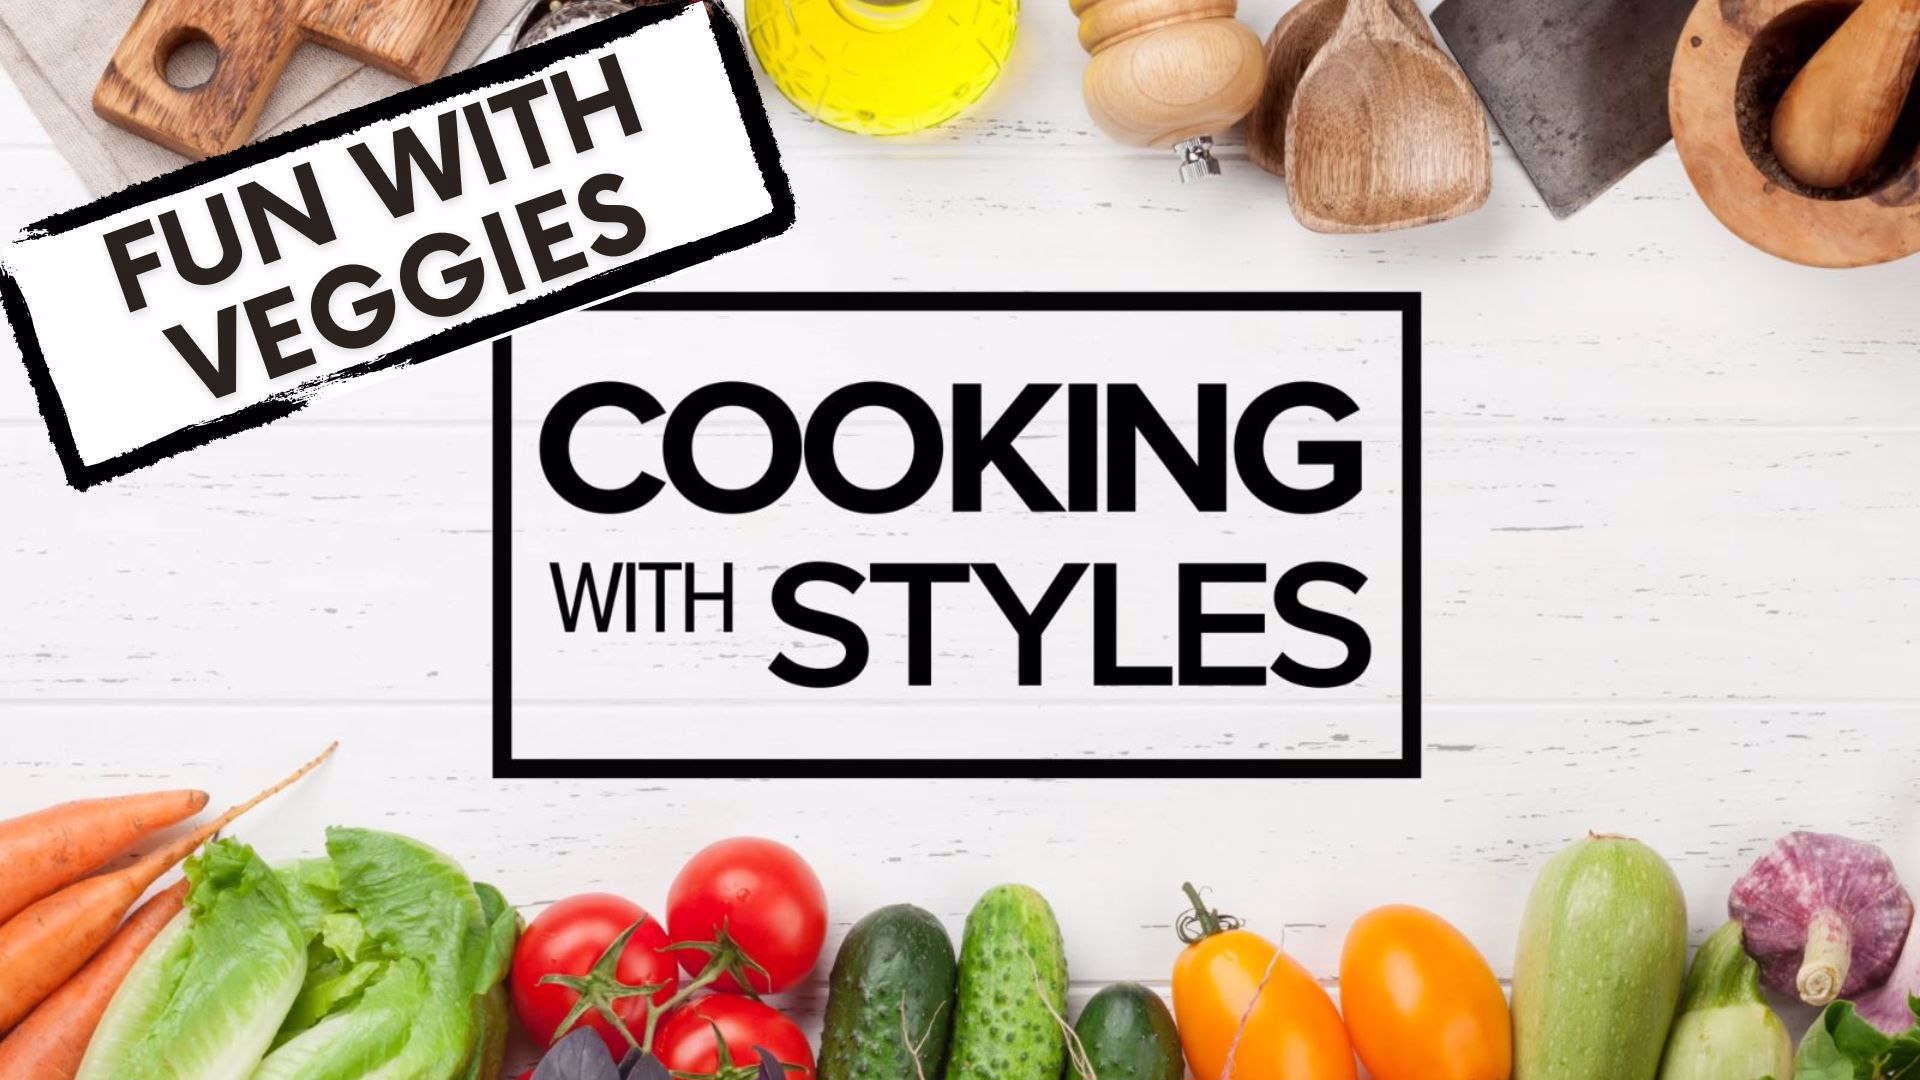 KFMB's Shawn Styles shows you have to "spice" up your vegetables for more flavorful, fun dishes that are sure to wow your family, friends and guests.